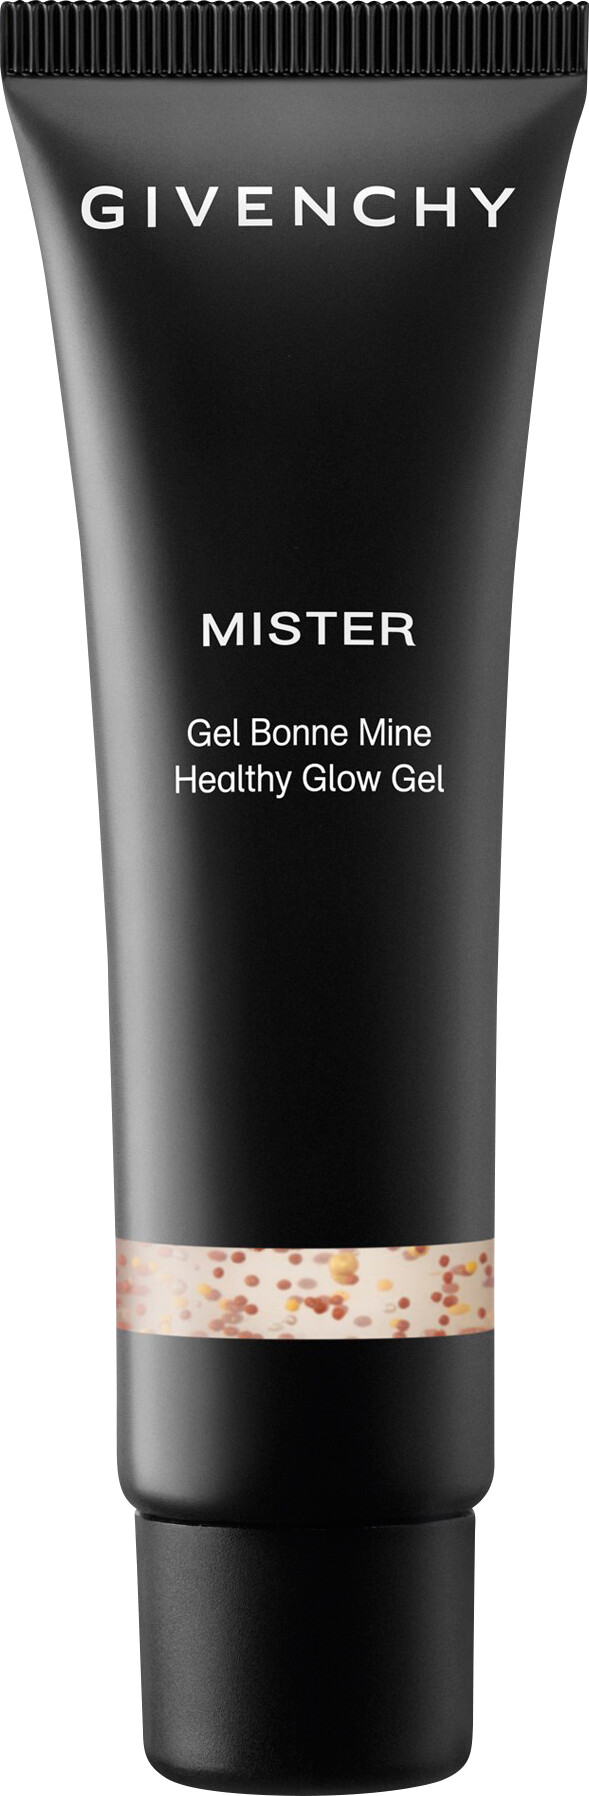 GIVENCHY Mister Healthy Glow Gel